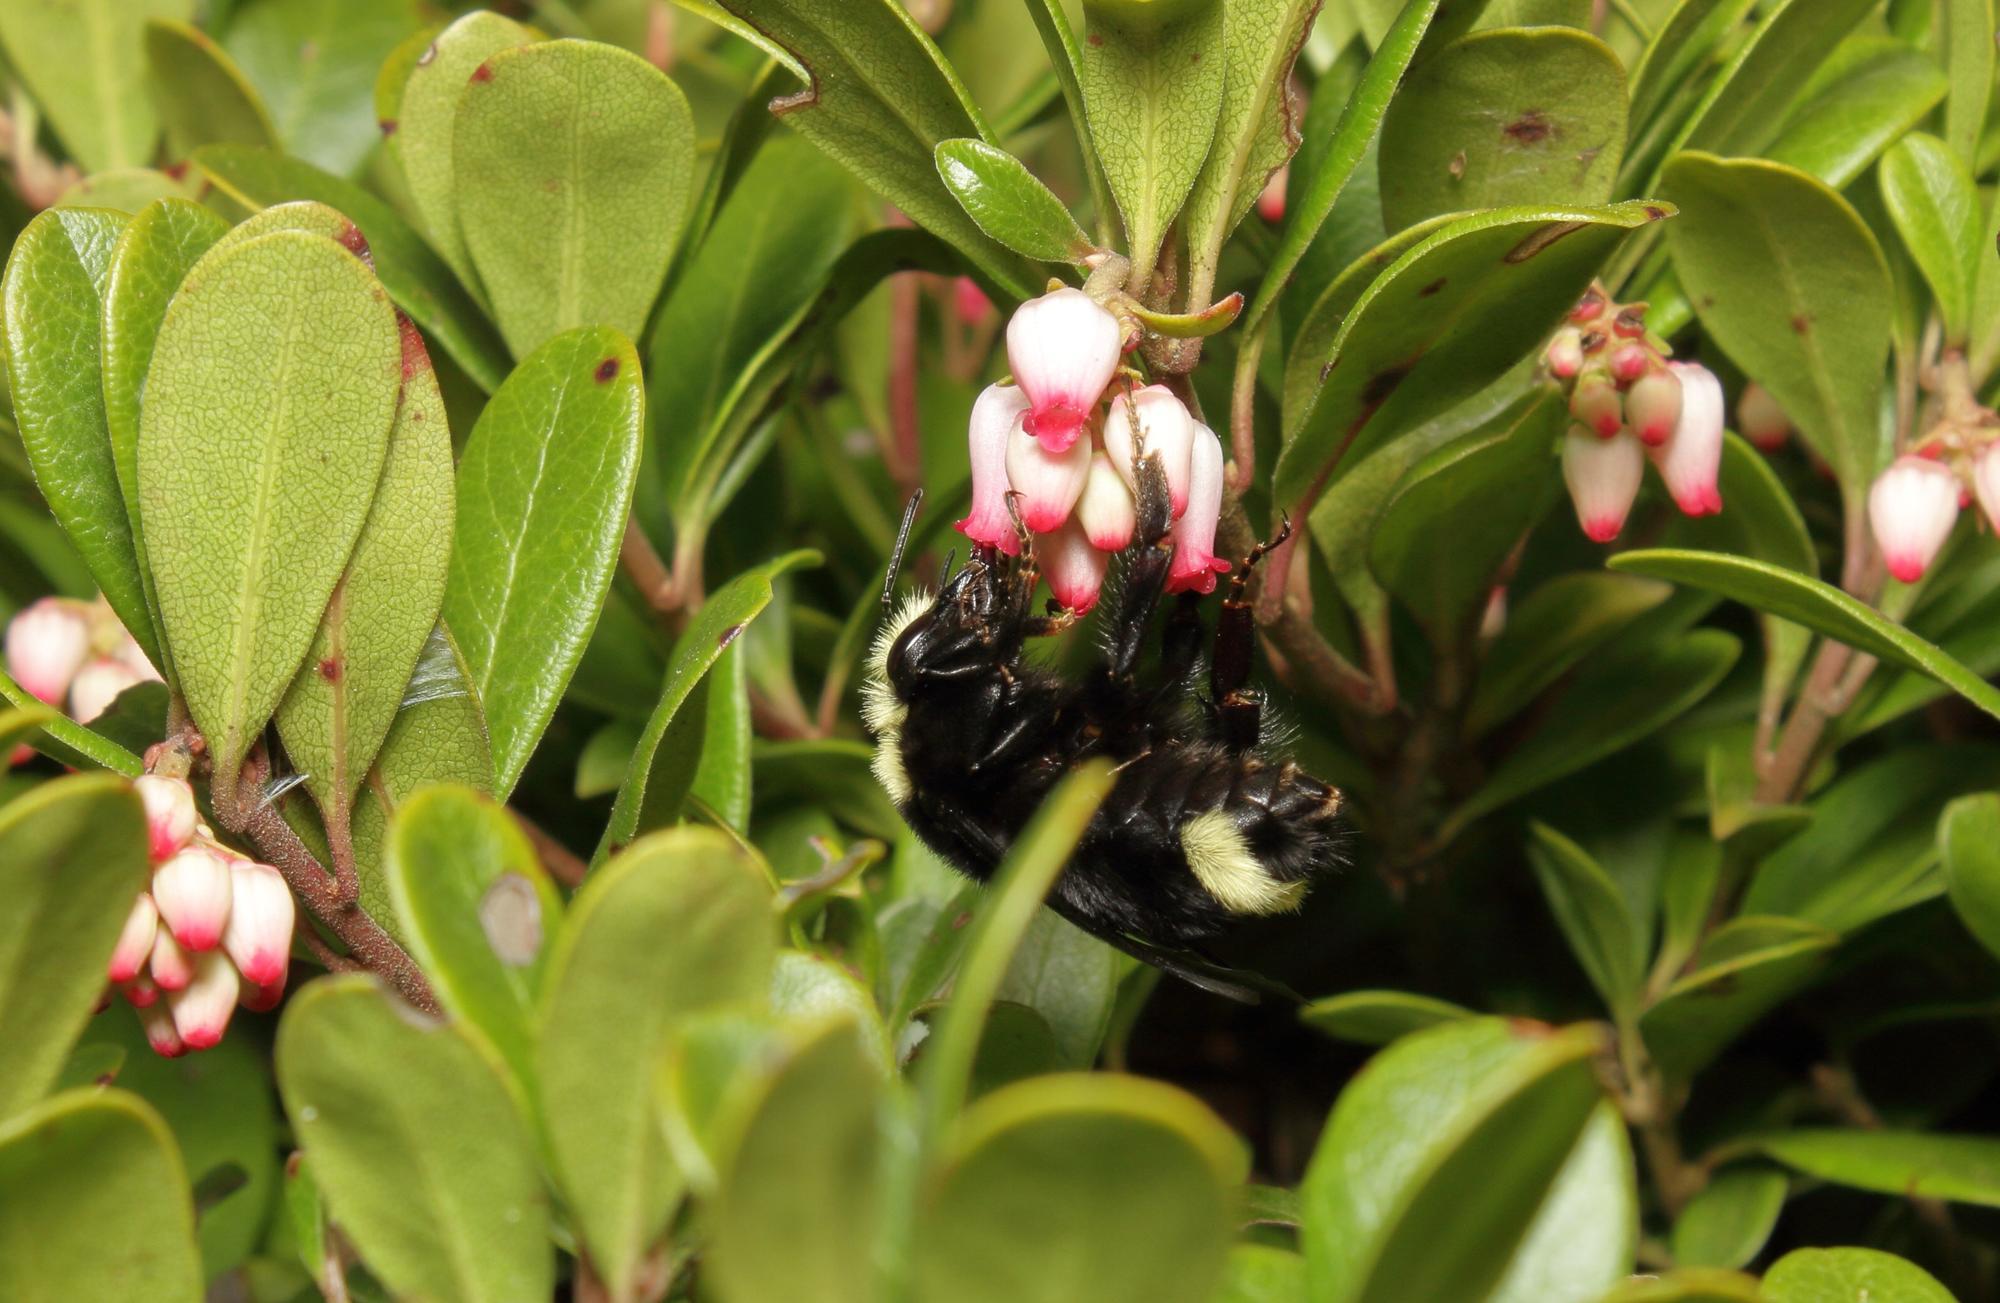 bumble bee on cup-shaped pink flowers on low plants with leathery leaves